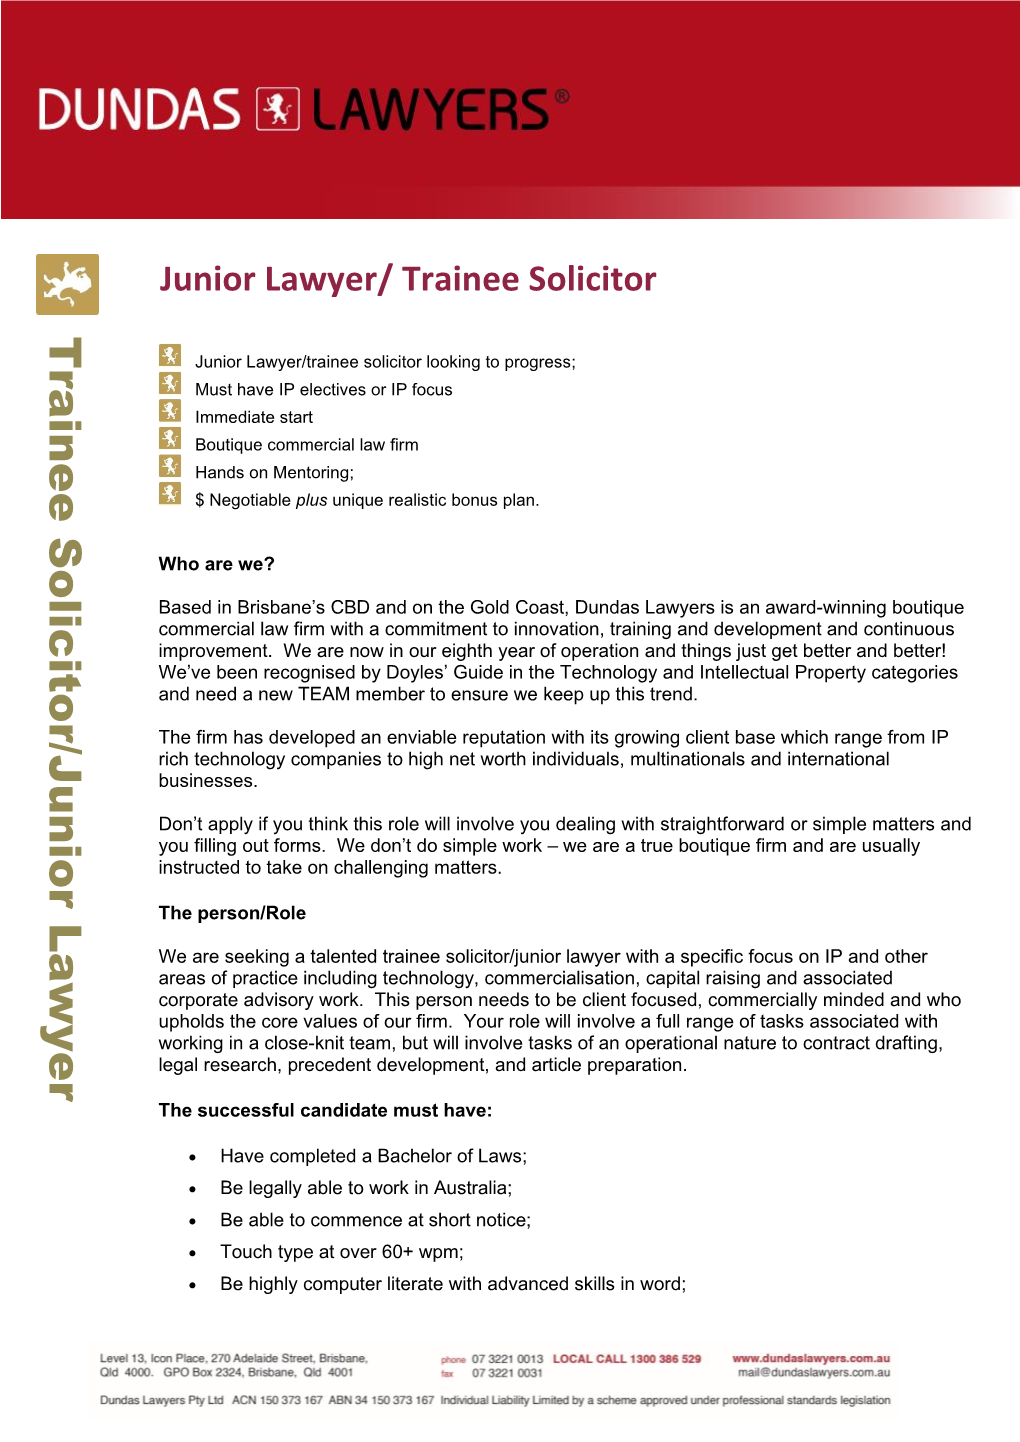 Train Ee Solicitor/Junior L Awyer